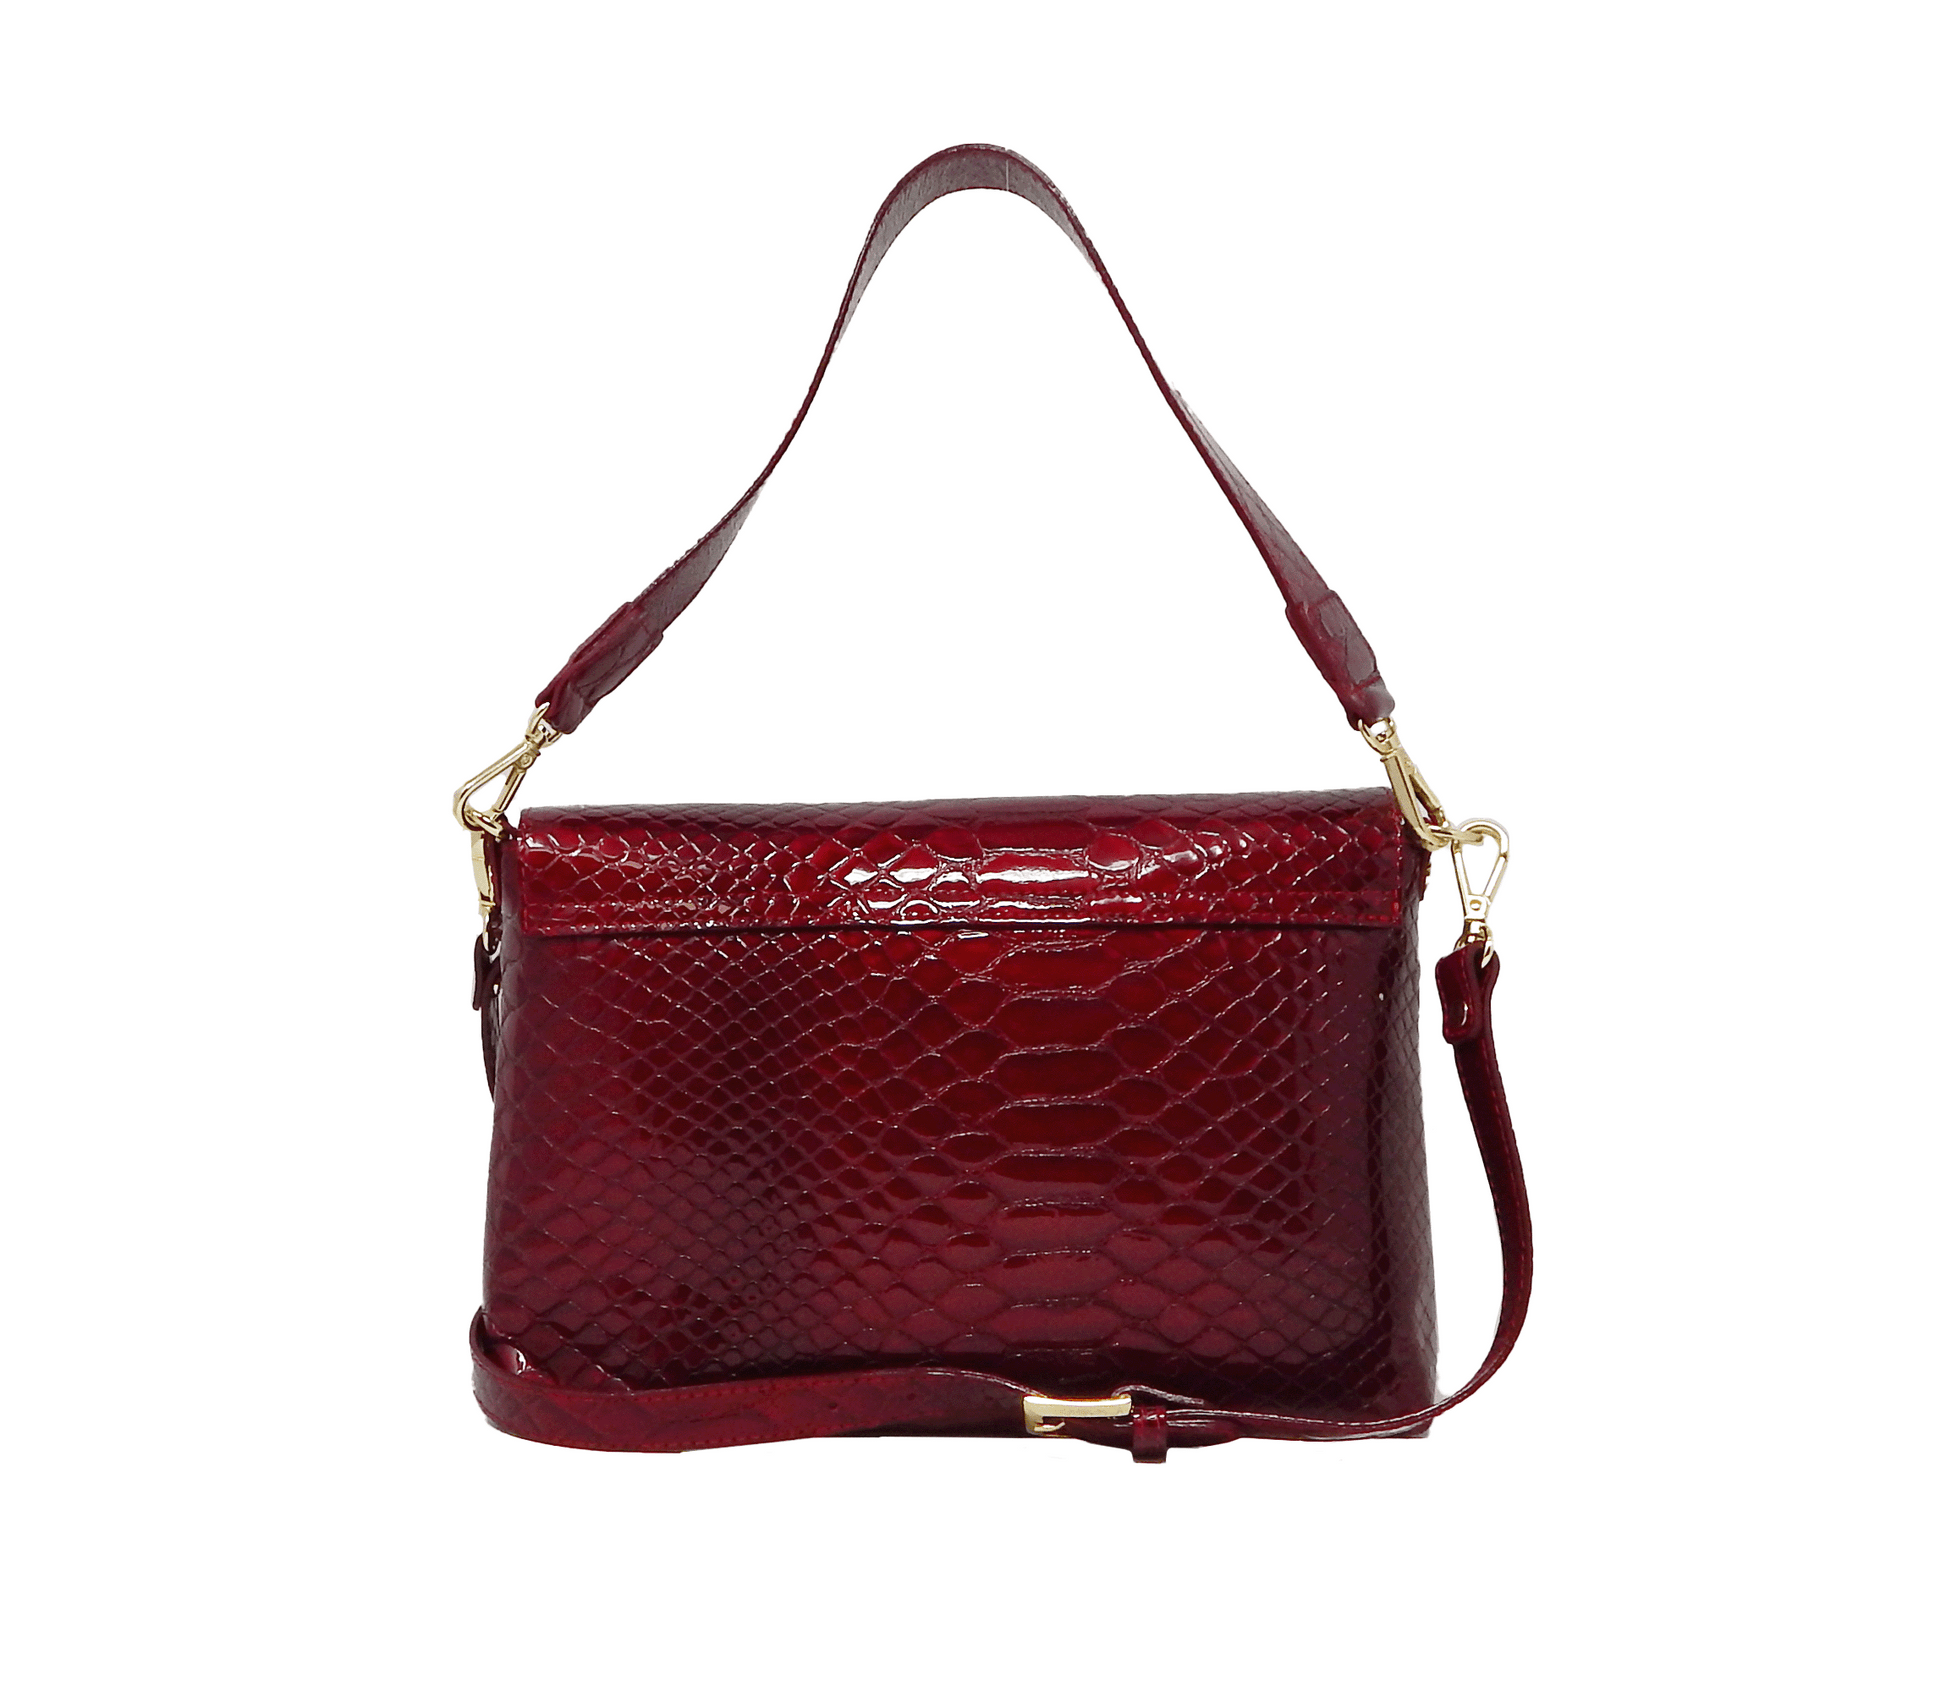 #color_ Red | Cavalinho Gallop 3 in 1: Patent Leather Clutch, Handbag or Crossbody Bag - Red - 18170509.04_3